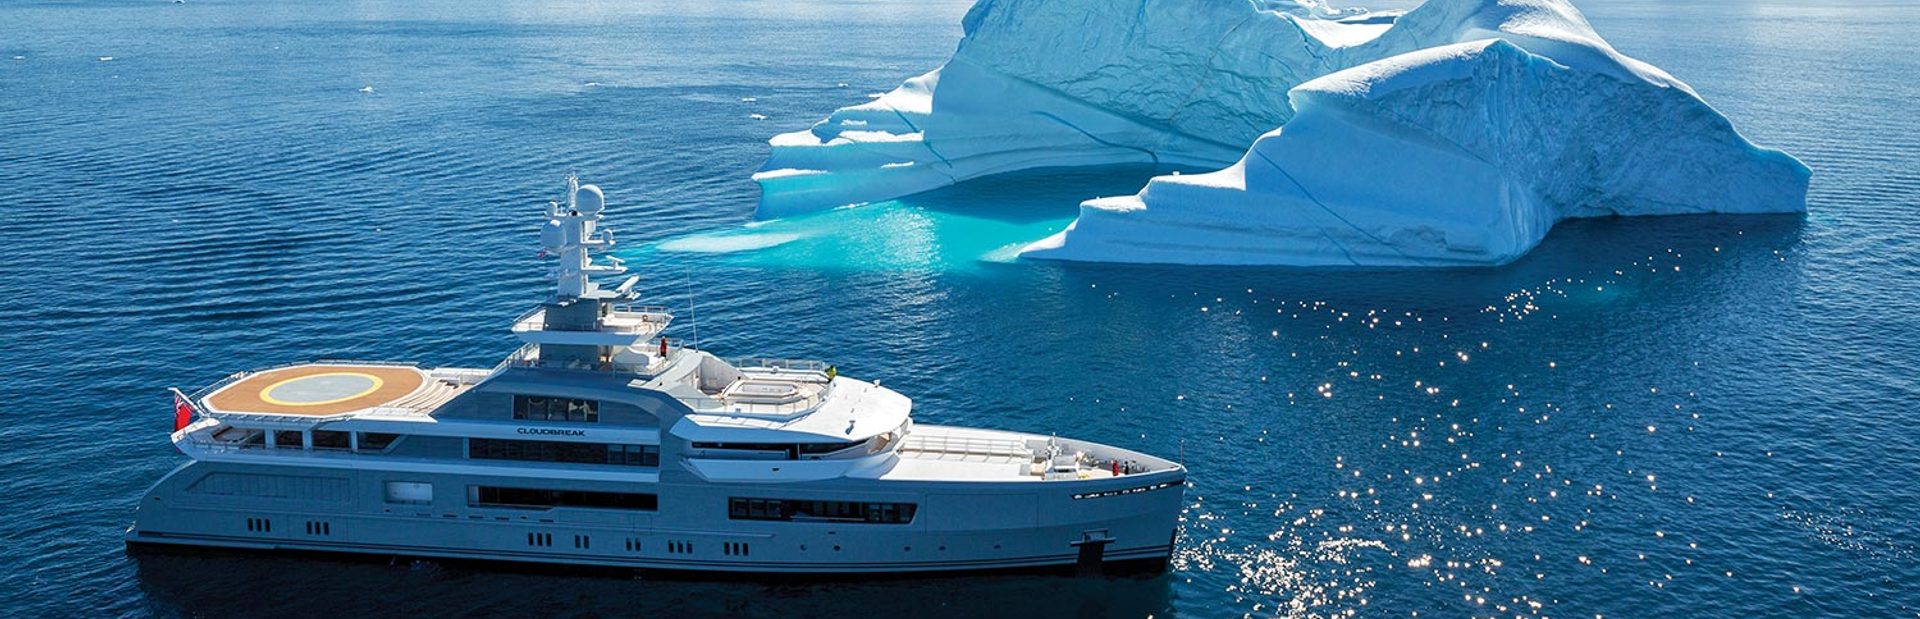 Antarctica: A superyacht vacation of a lifetime